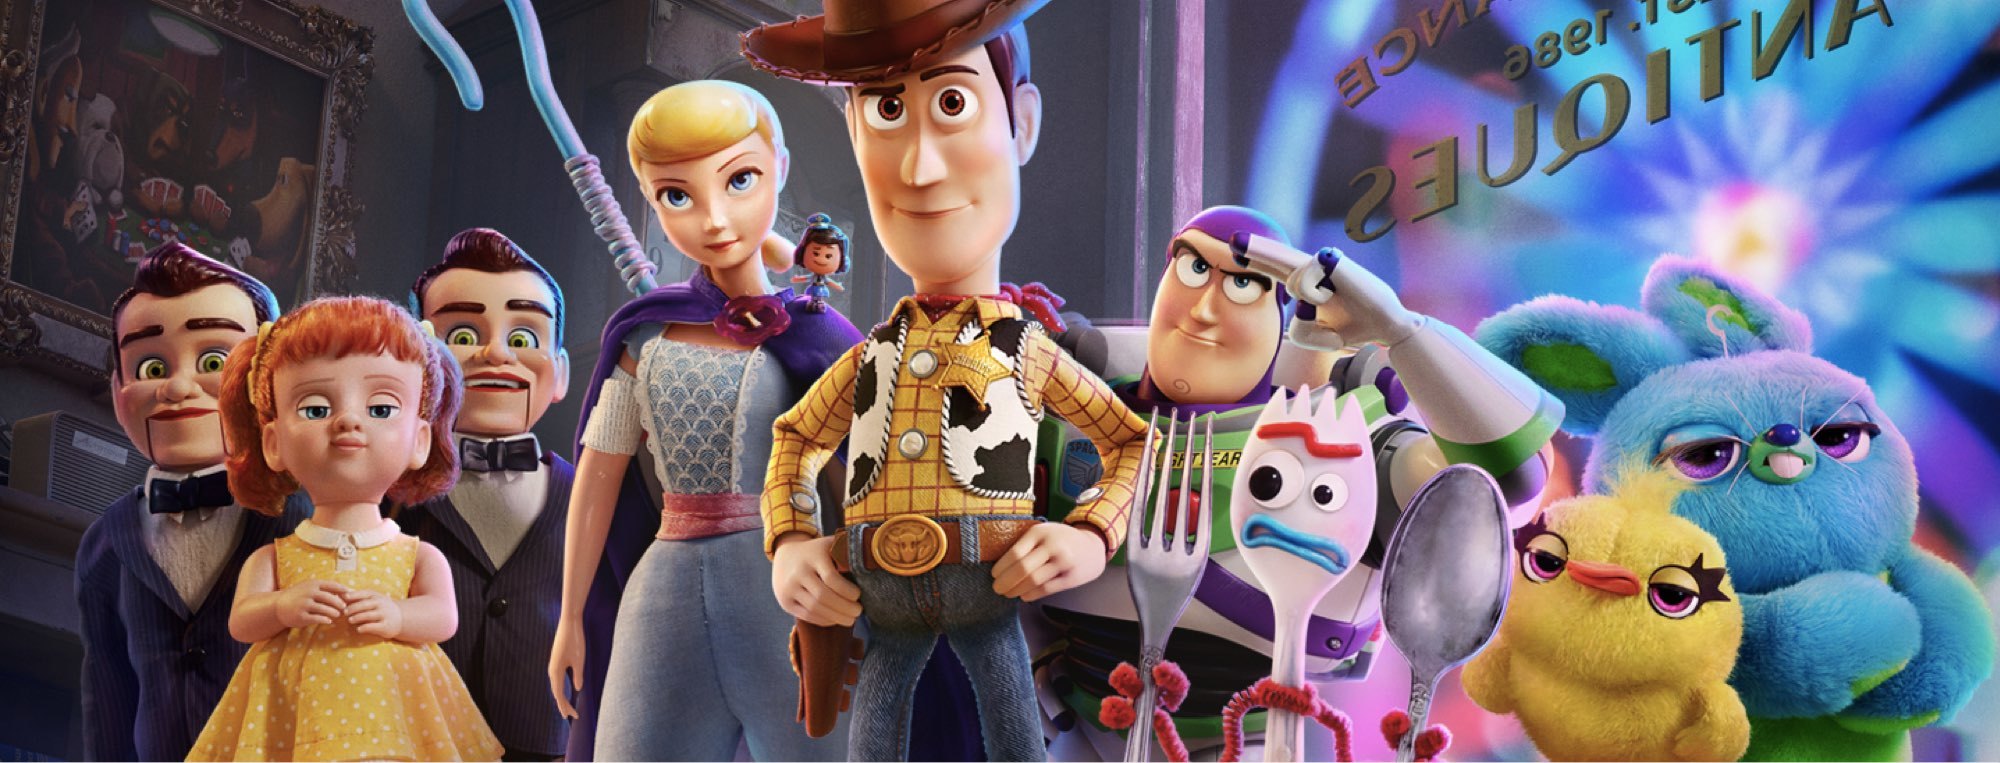 Toy Story 4 download the new for windows